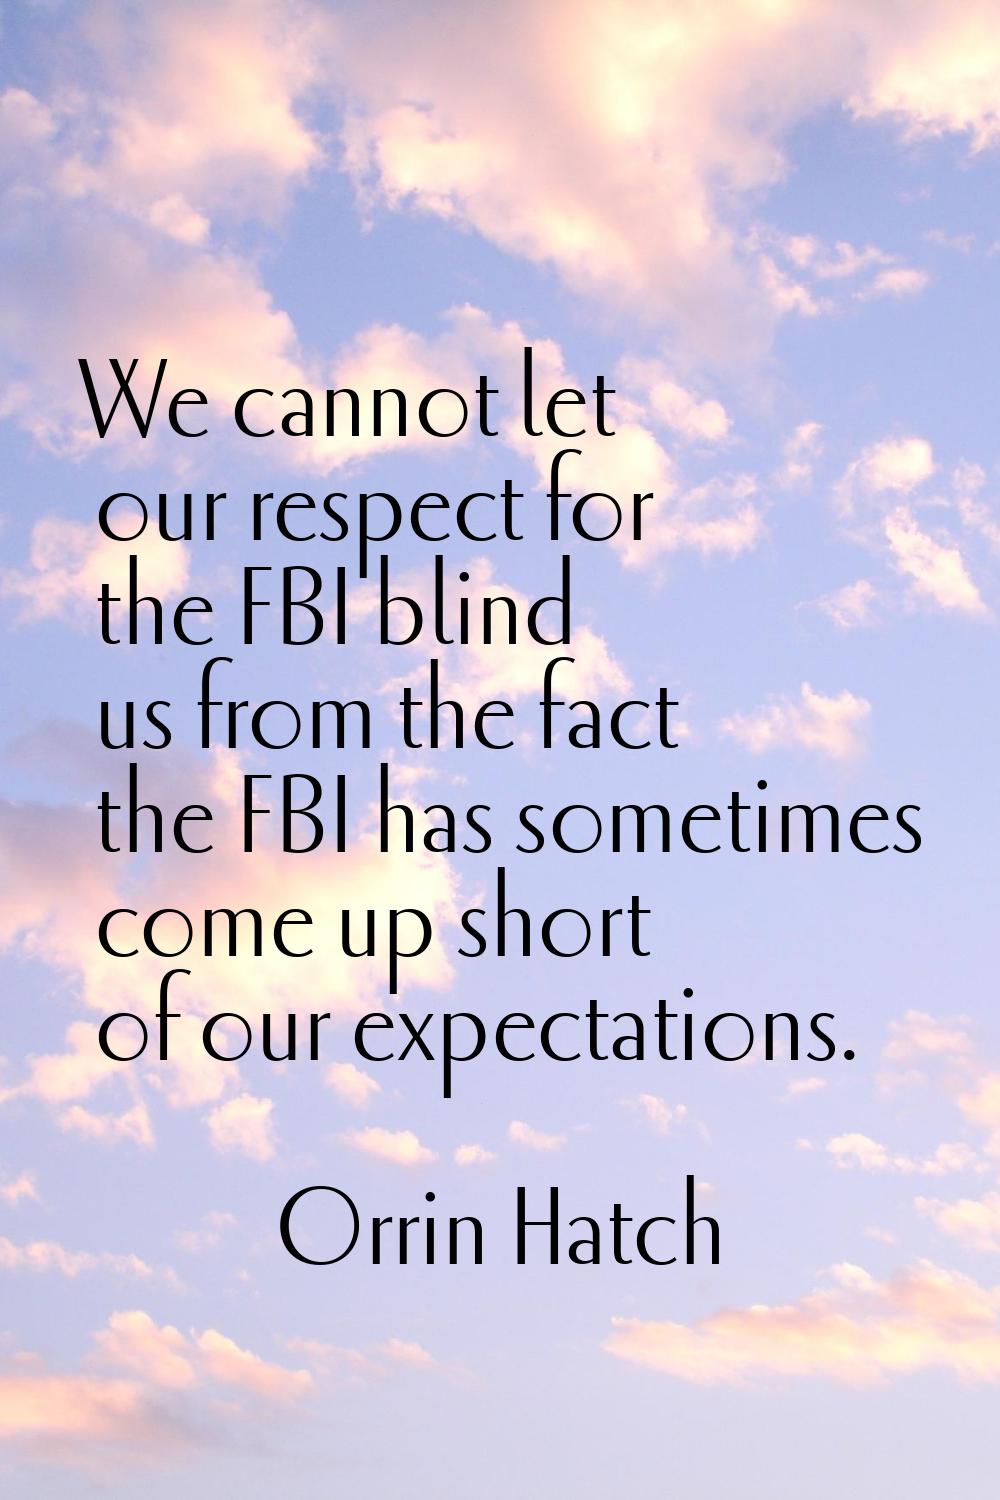 We cannot let our respect for the FBI blind us from the fact the FBI has sometimes come up short of